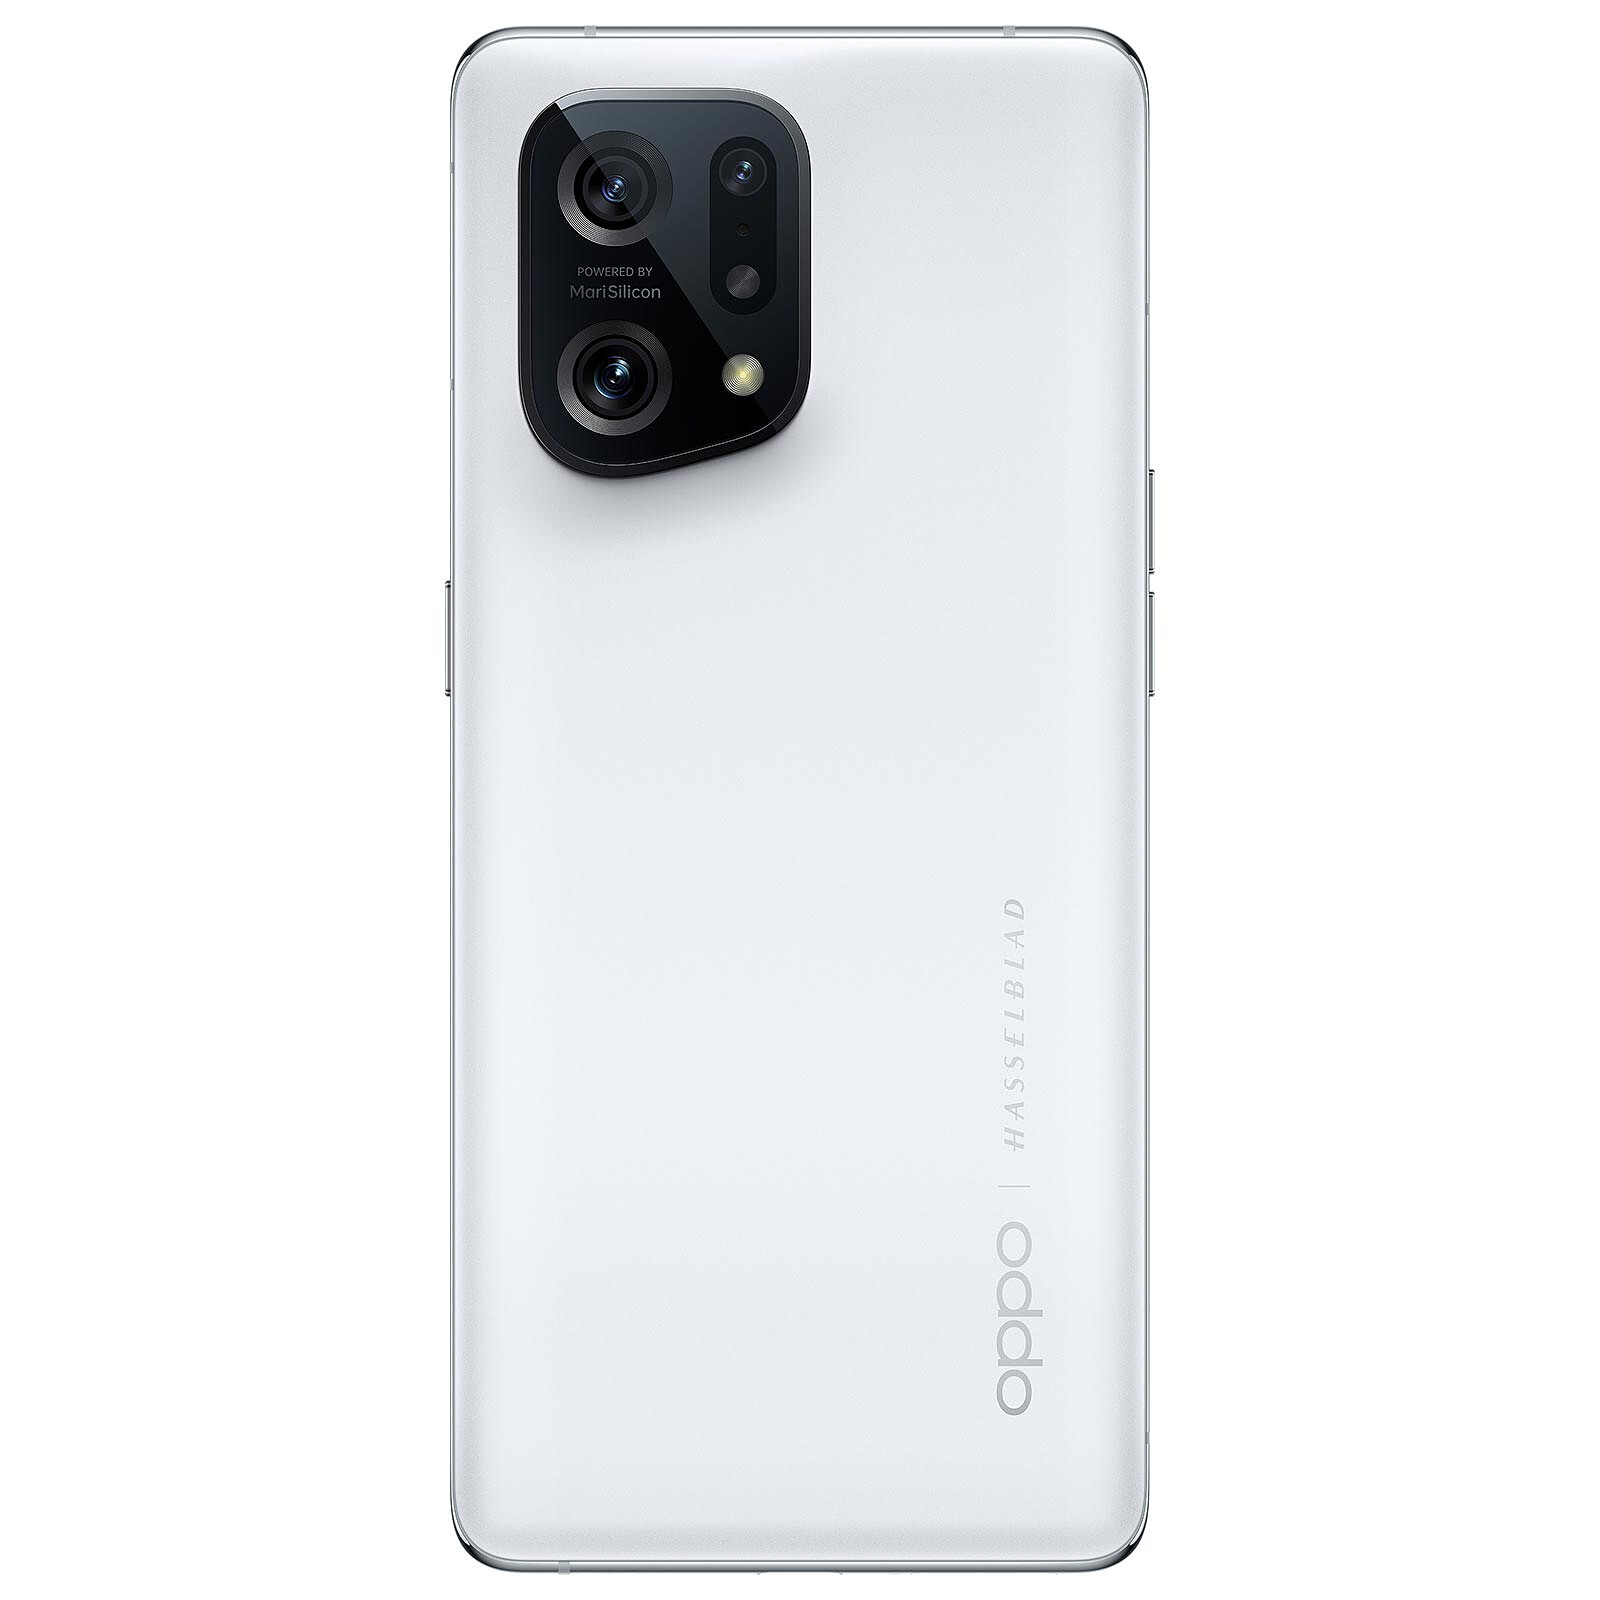 OPPO Find X5 5G White - Mobile phone & smartphone - LDLC 3-year